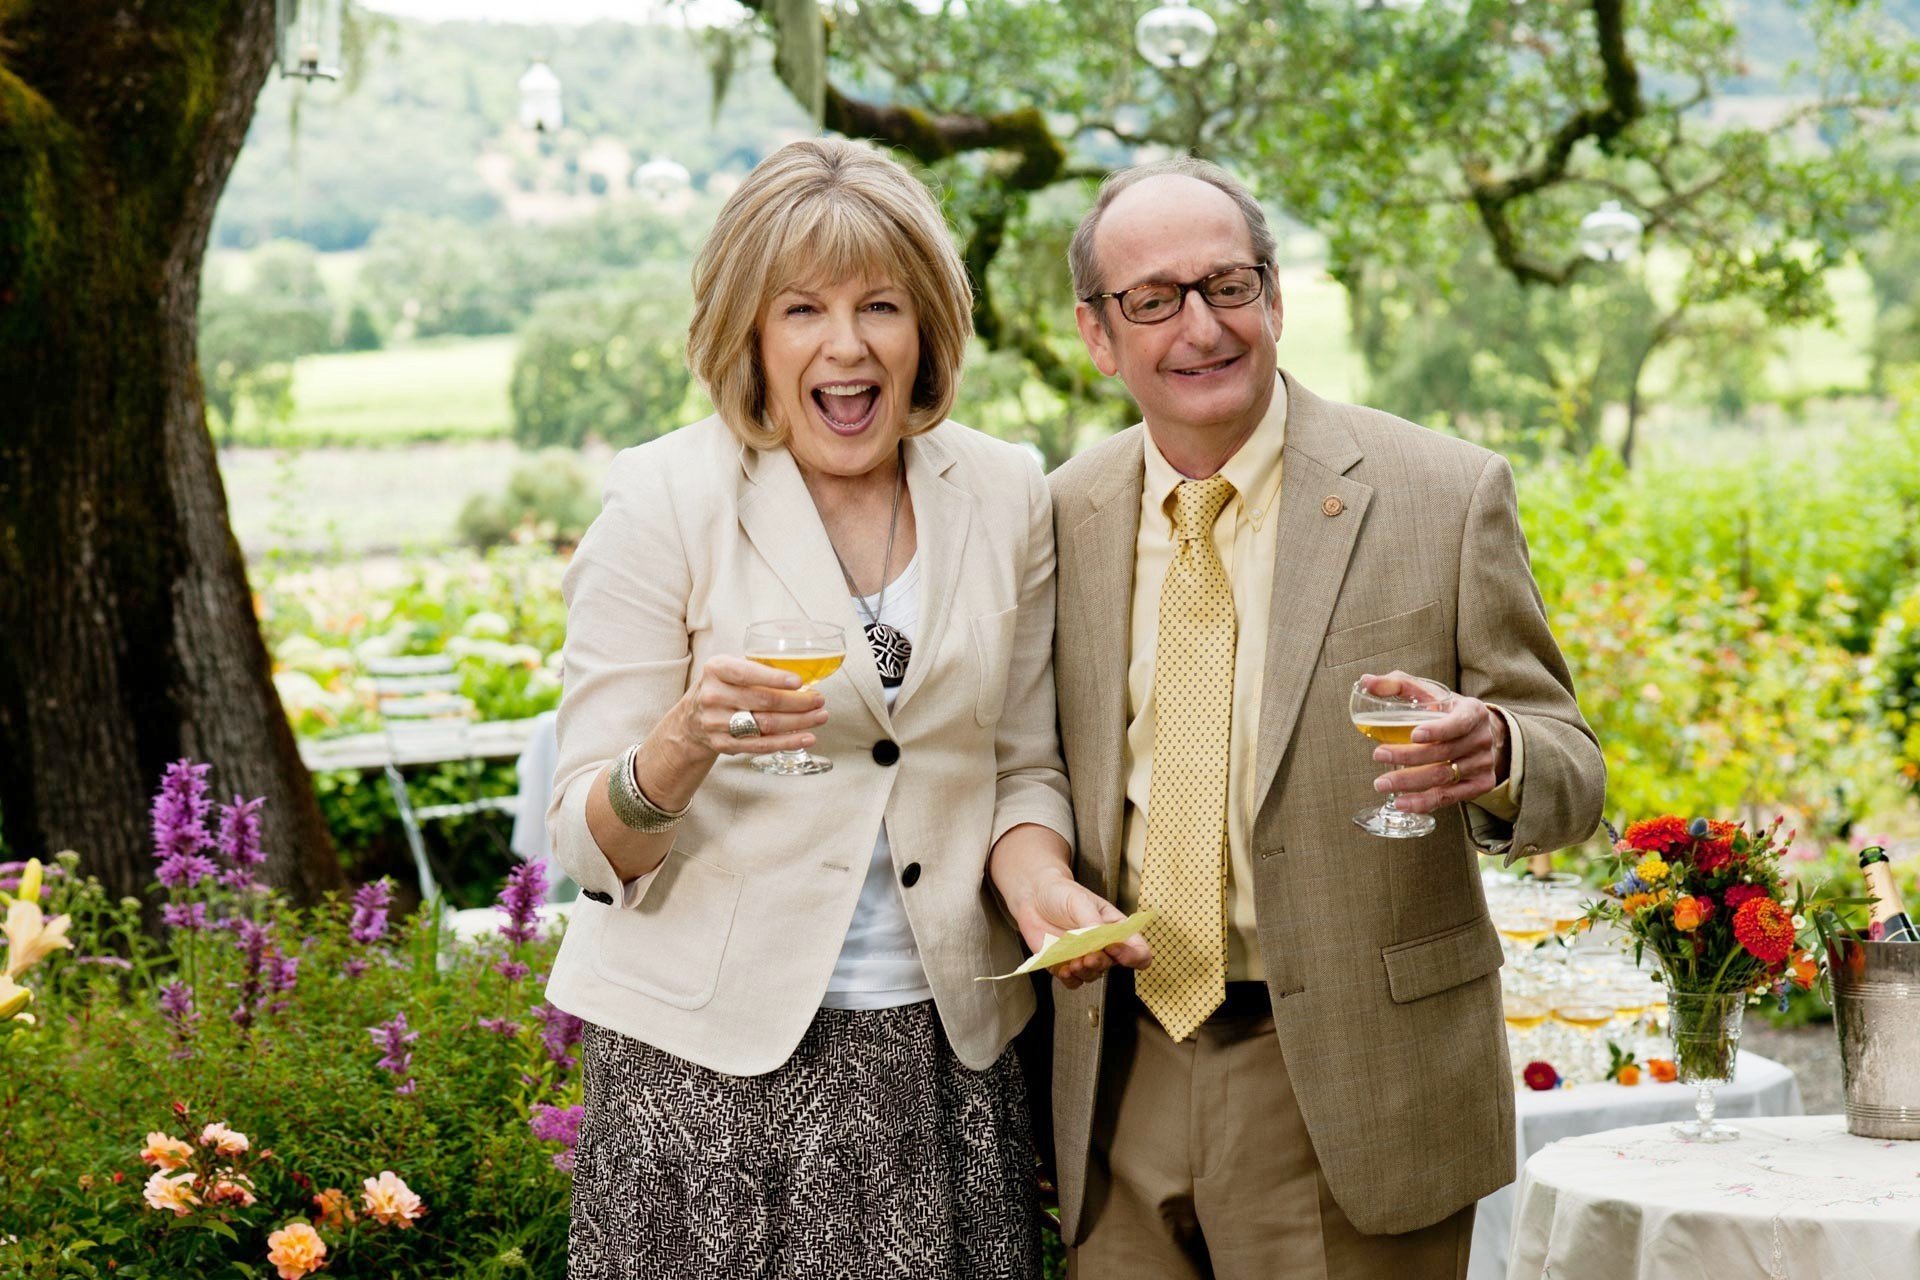 Mimi Kennedy stars as Carol Solomon and David Paymer stars as Pete Solomon in Universal Pictures' The Five-Year Engagement (2012)